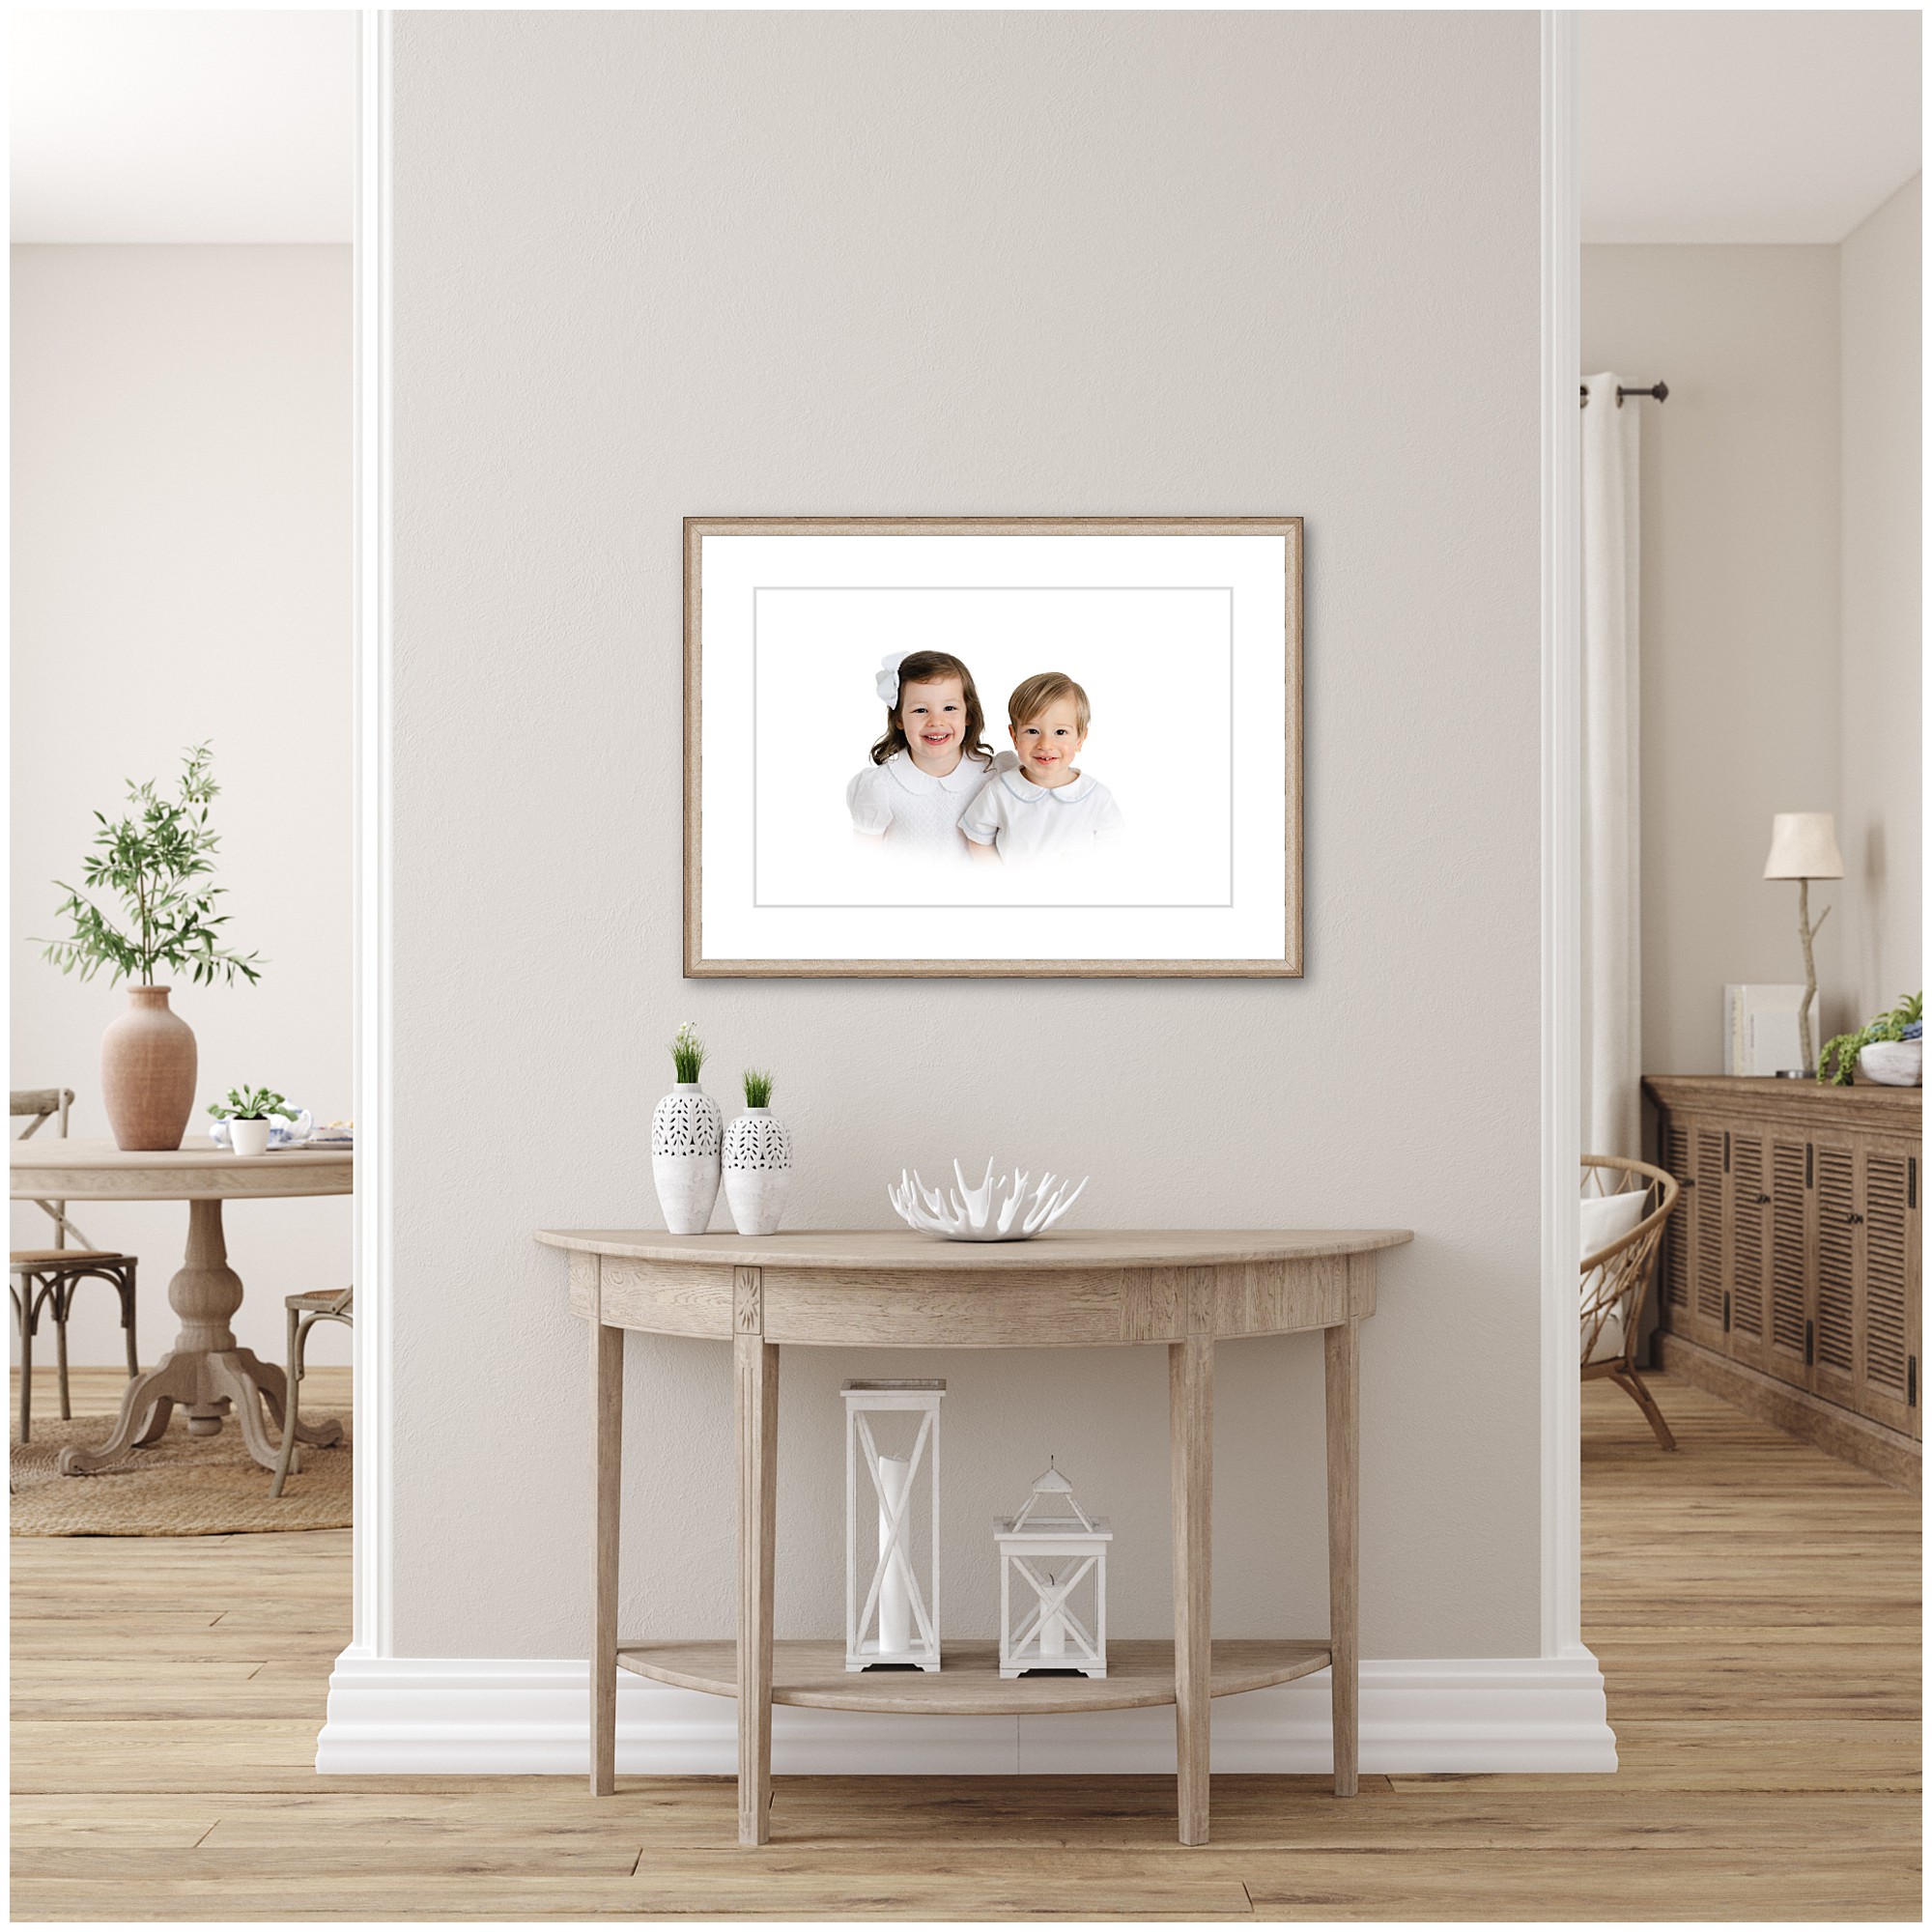 A large frame featuring a portrait of a young brother and sister duo.